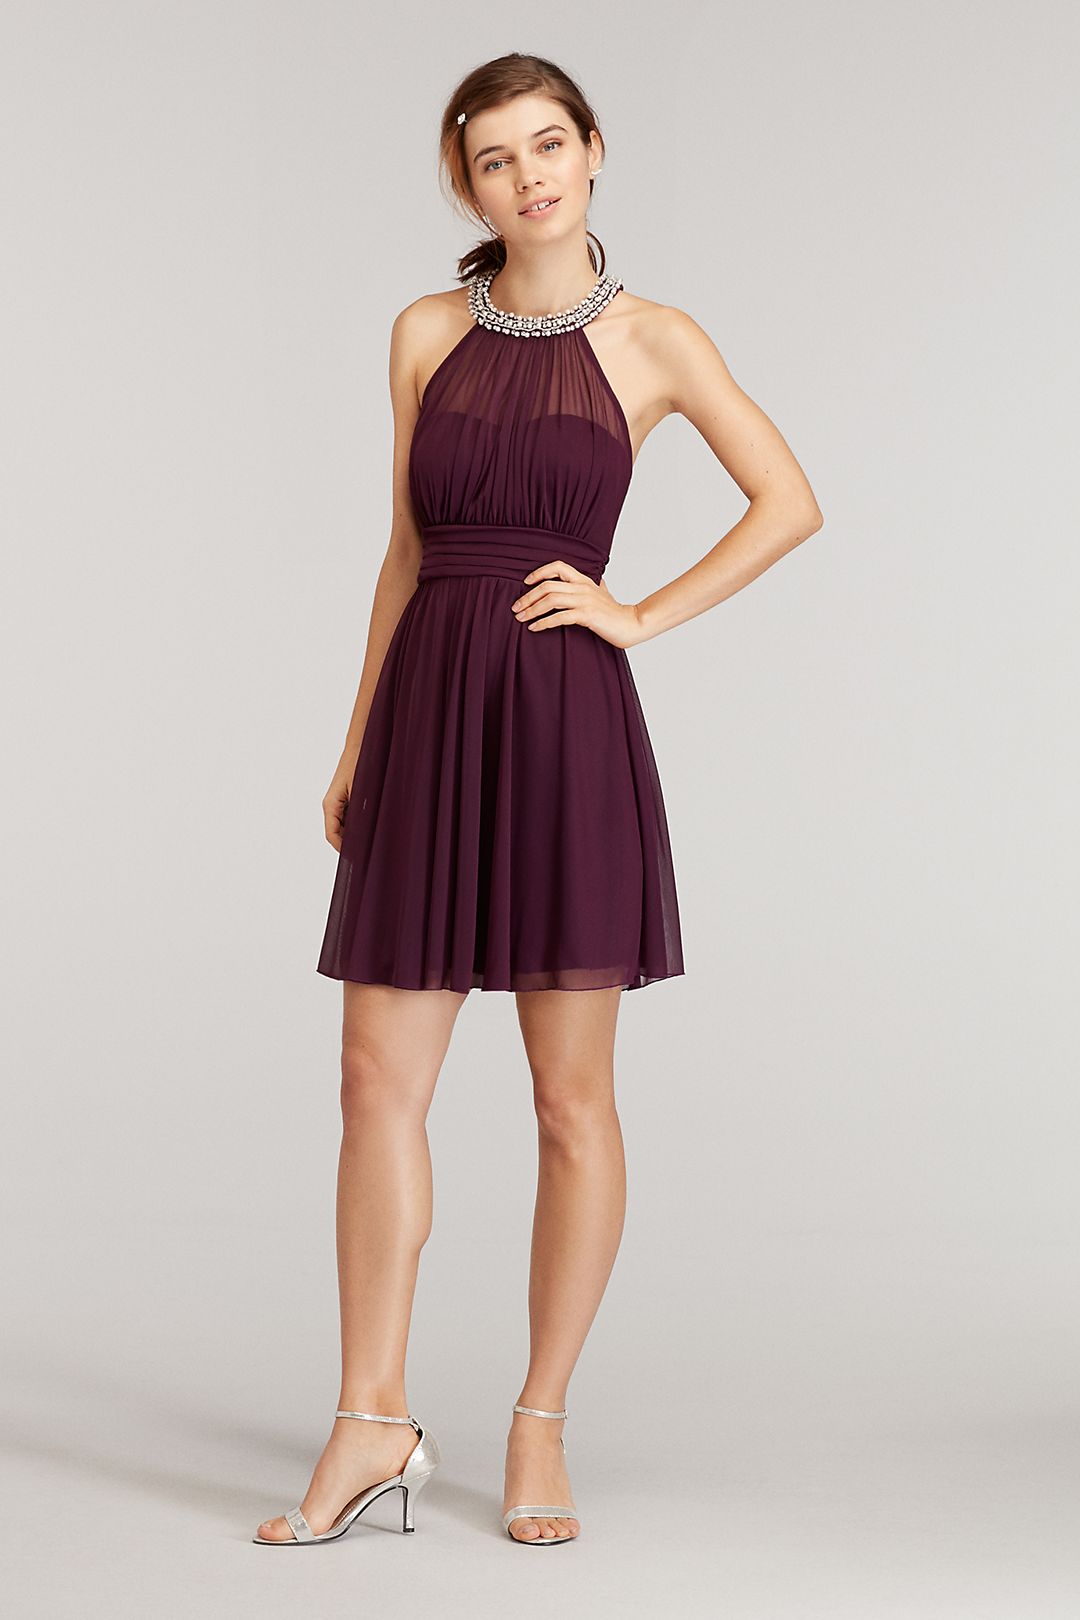 Pearl Trimed Halter Dress with Illusion Neckline Image 1